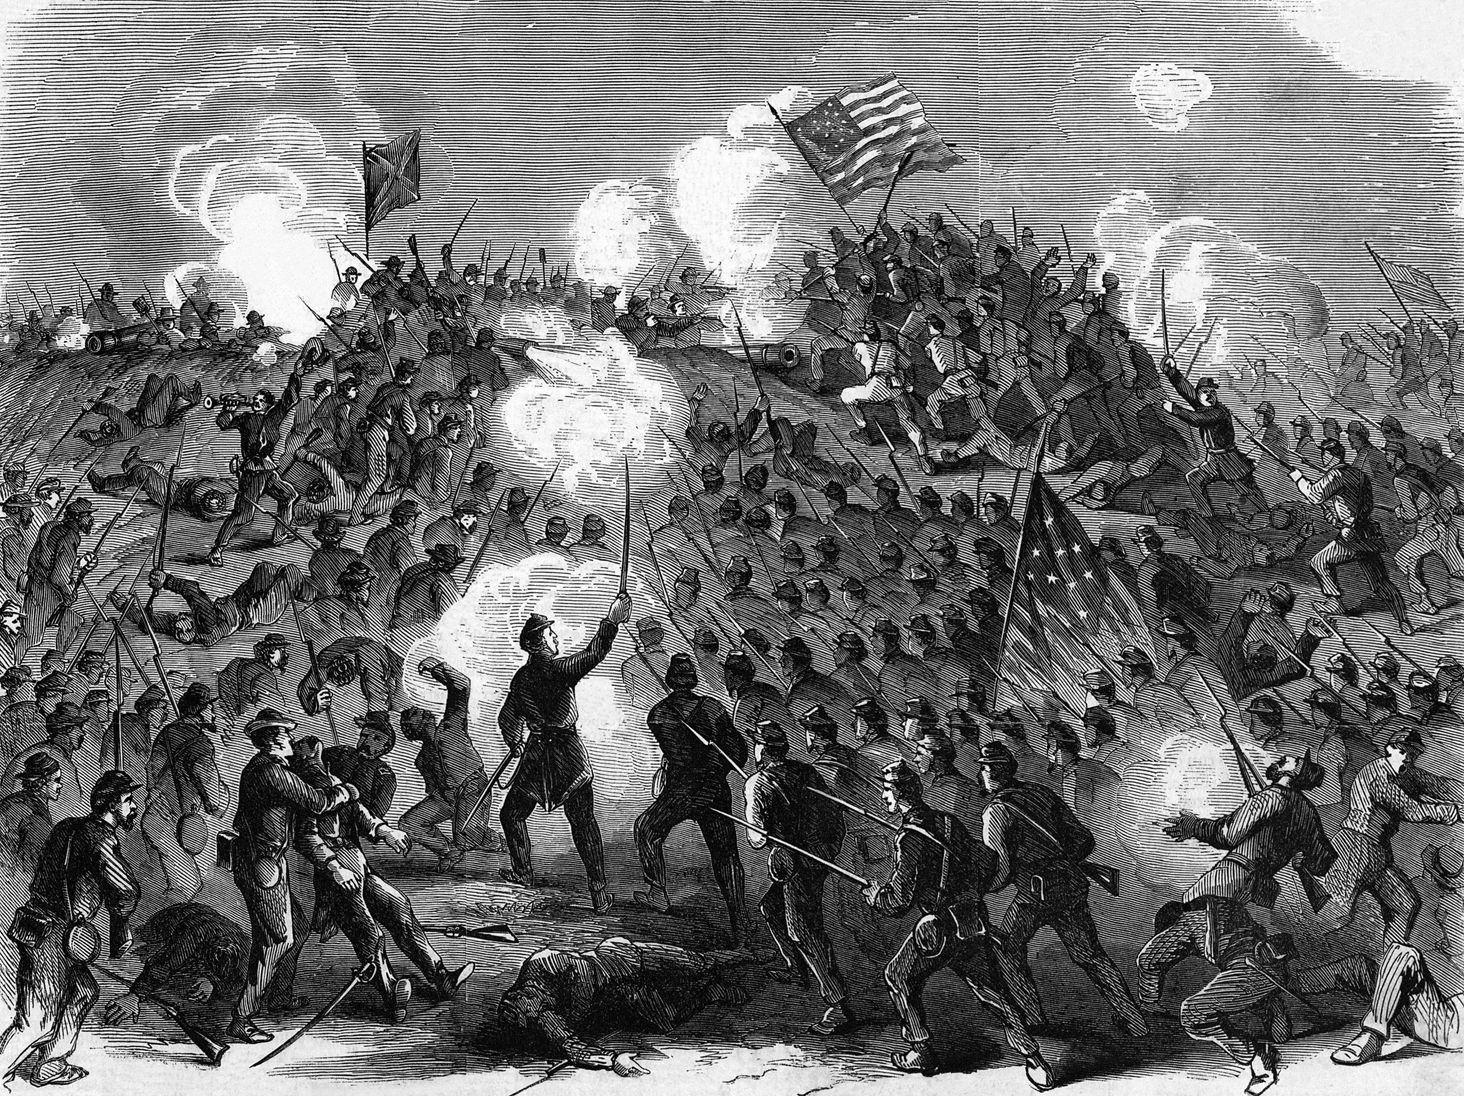 The desperate nature of the assault on Fort Wagner that occurred at dusk on July 18, 1863, is captured in a period illustration. The 54th Massachusetts suffered approximately 50 percent casualties.